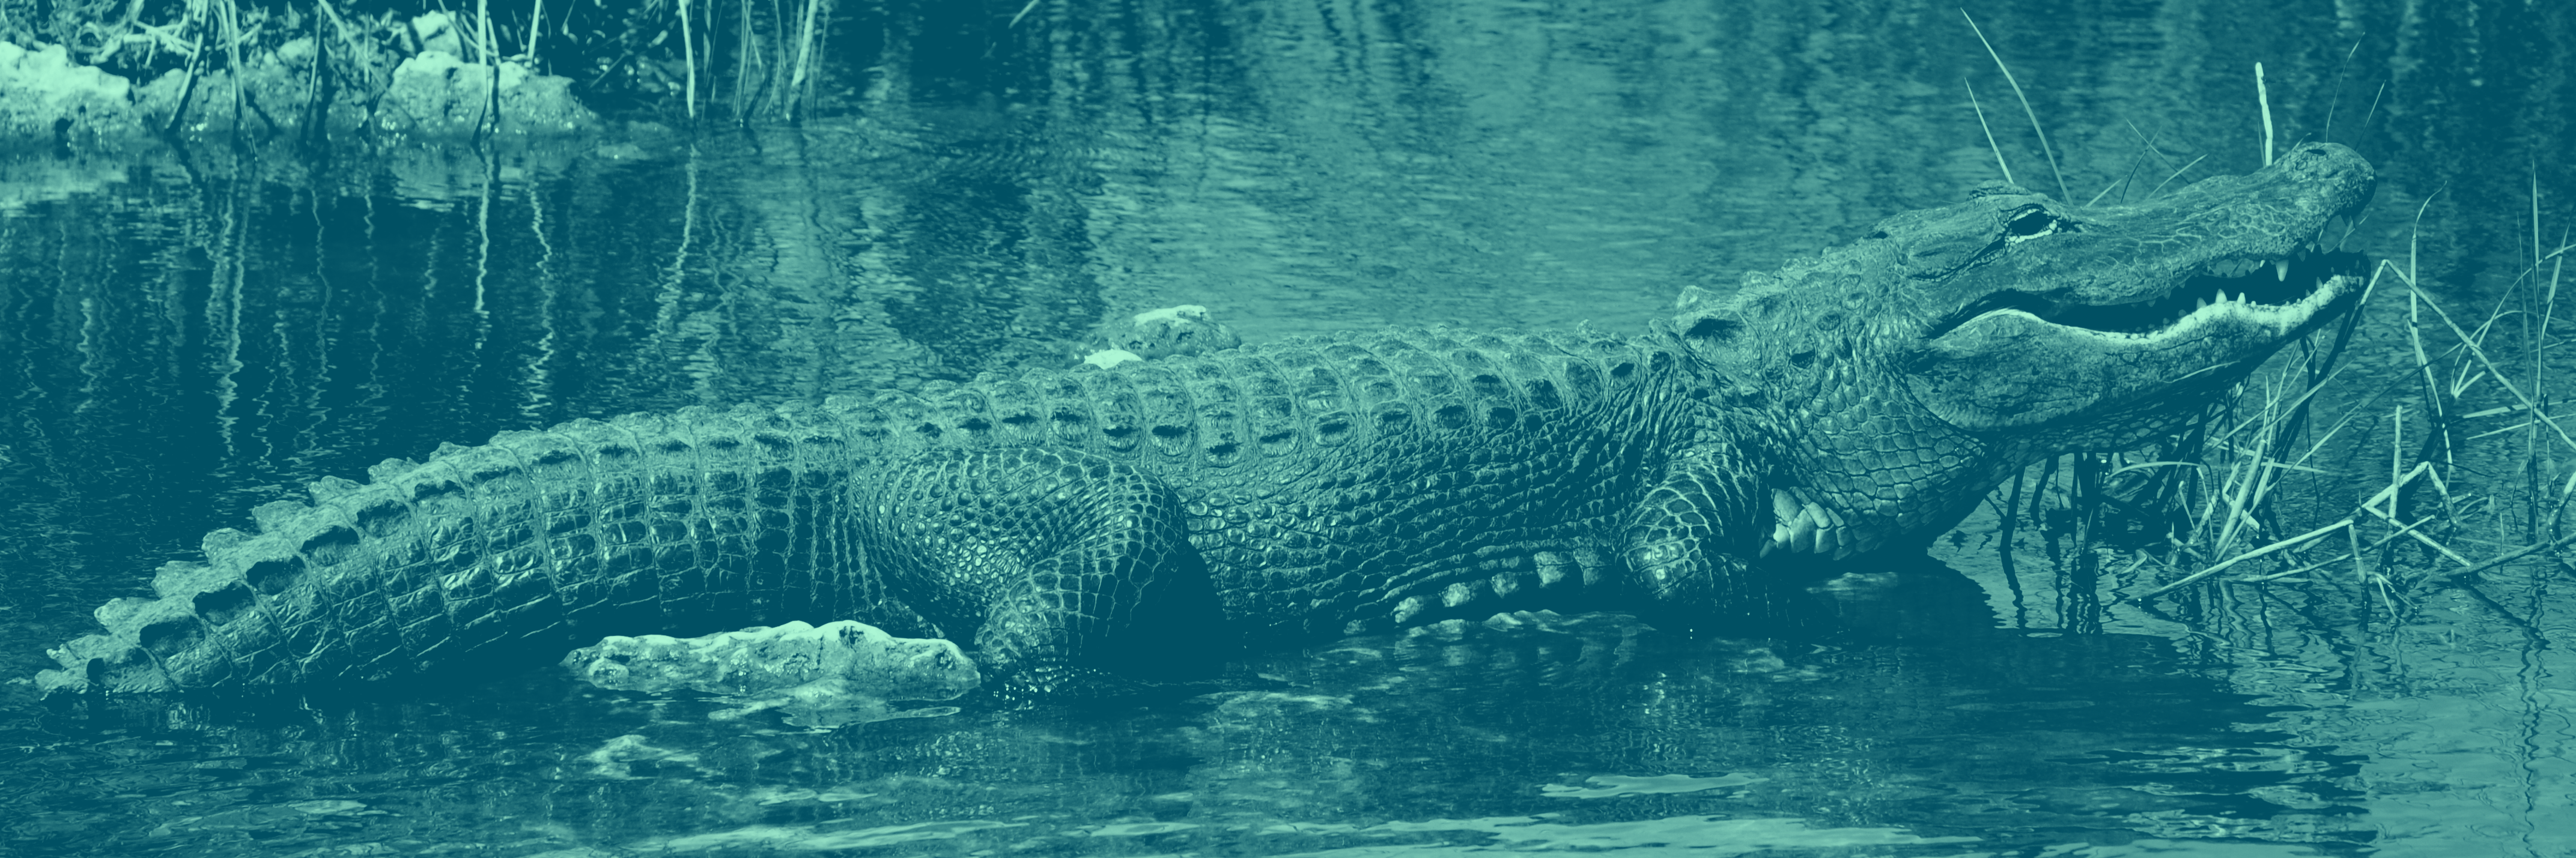 Alligator" vs. "Crocodile": Do You Know The Difference